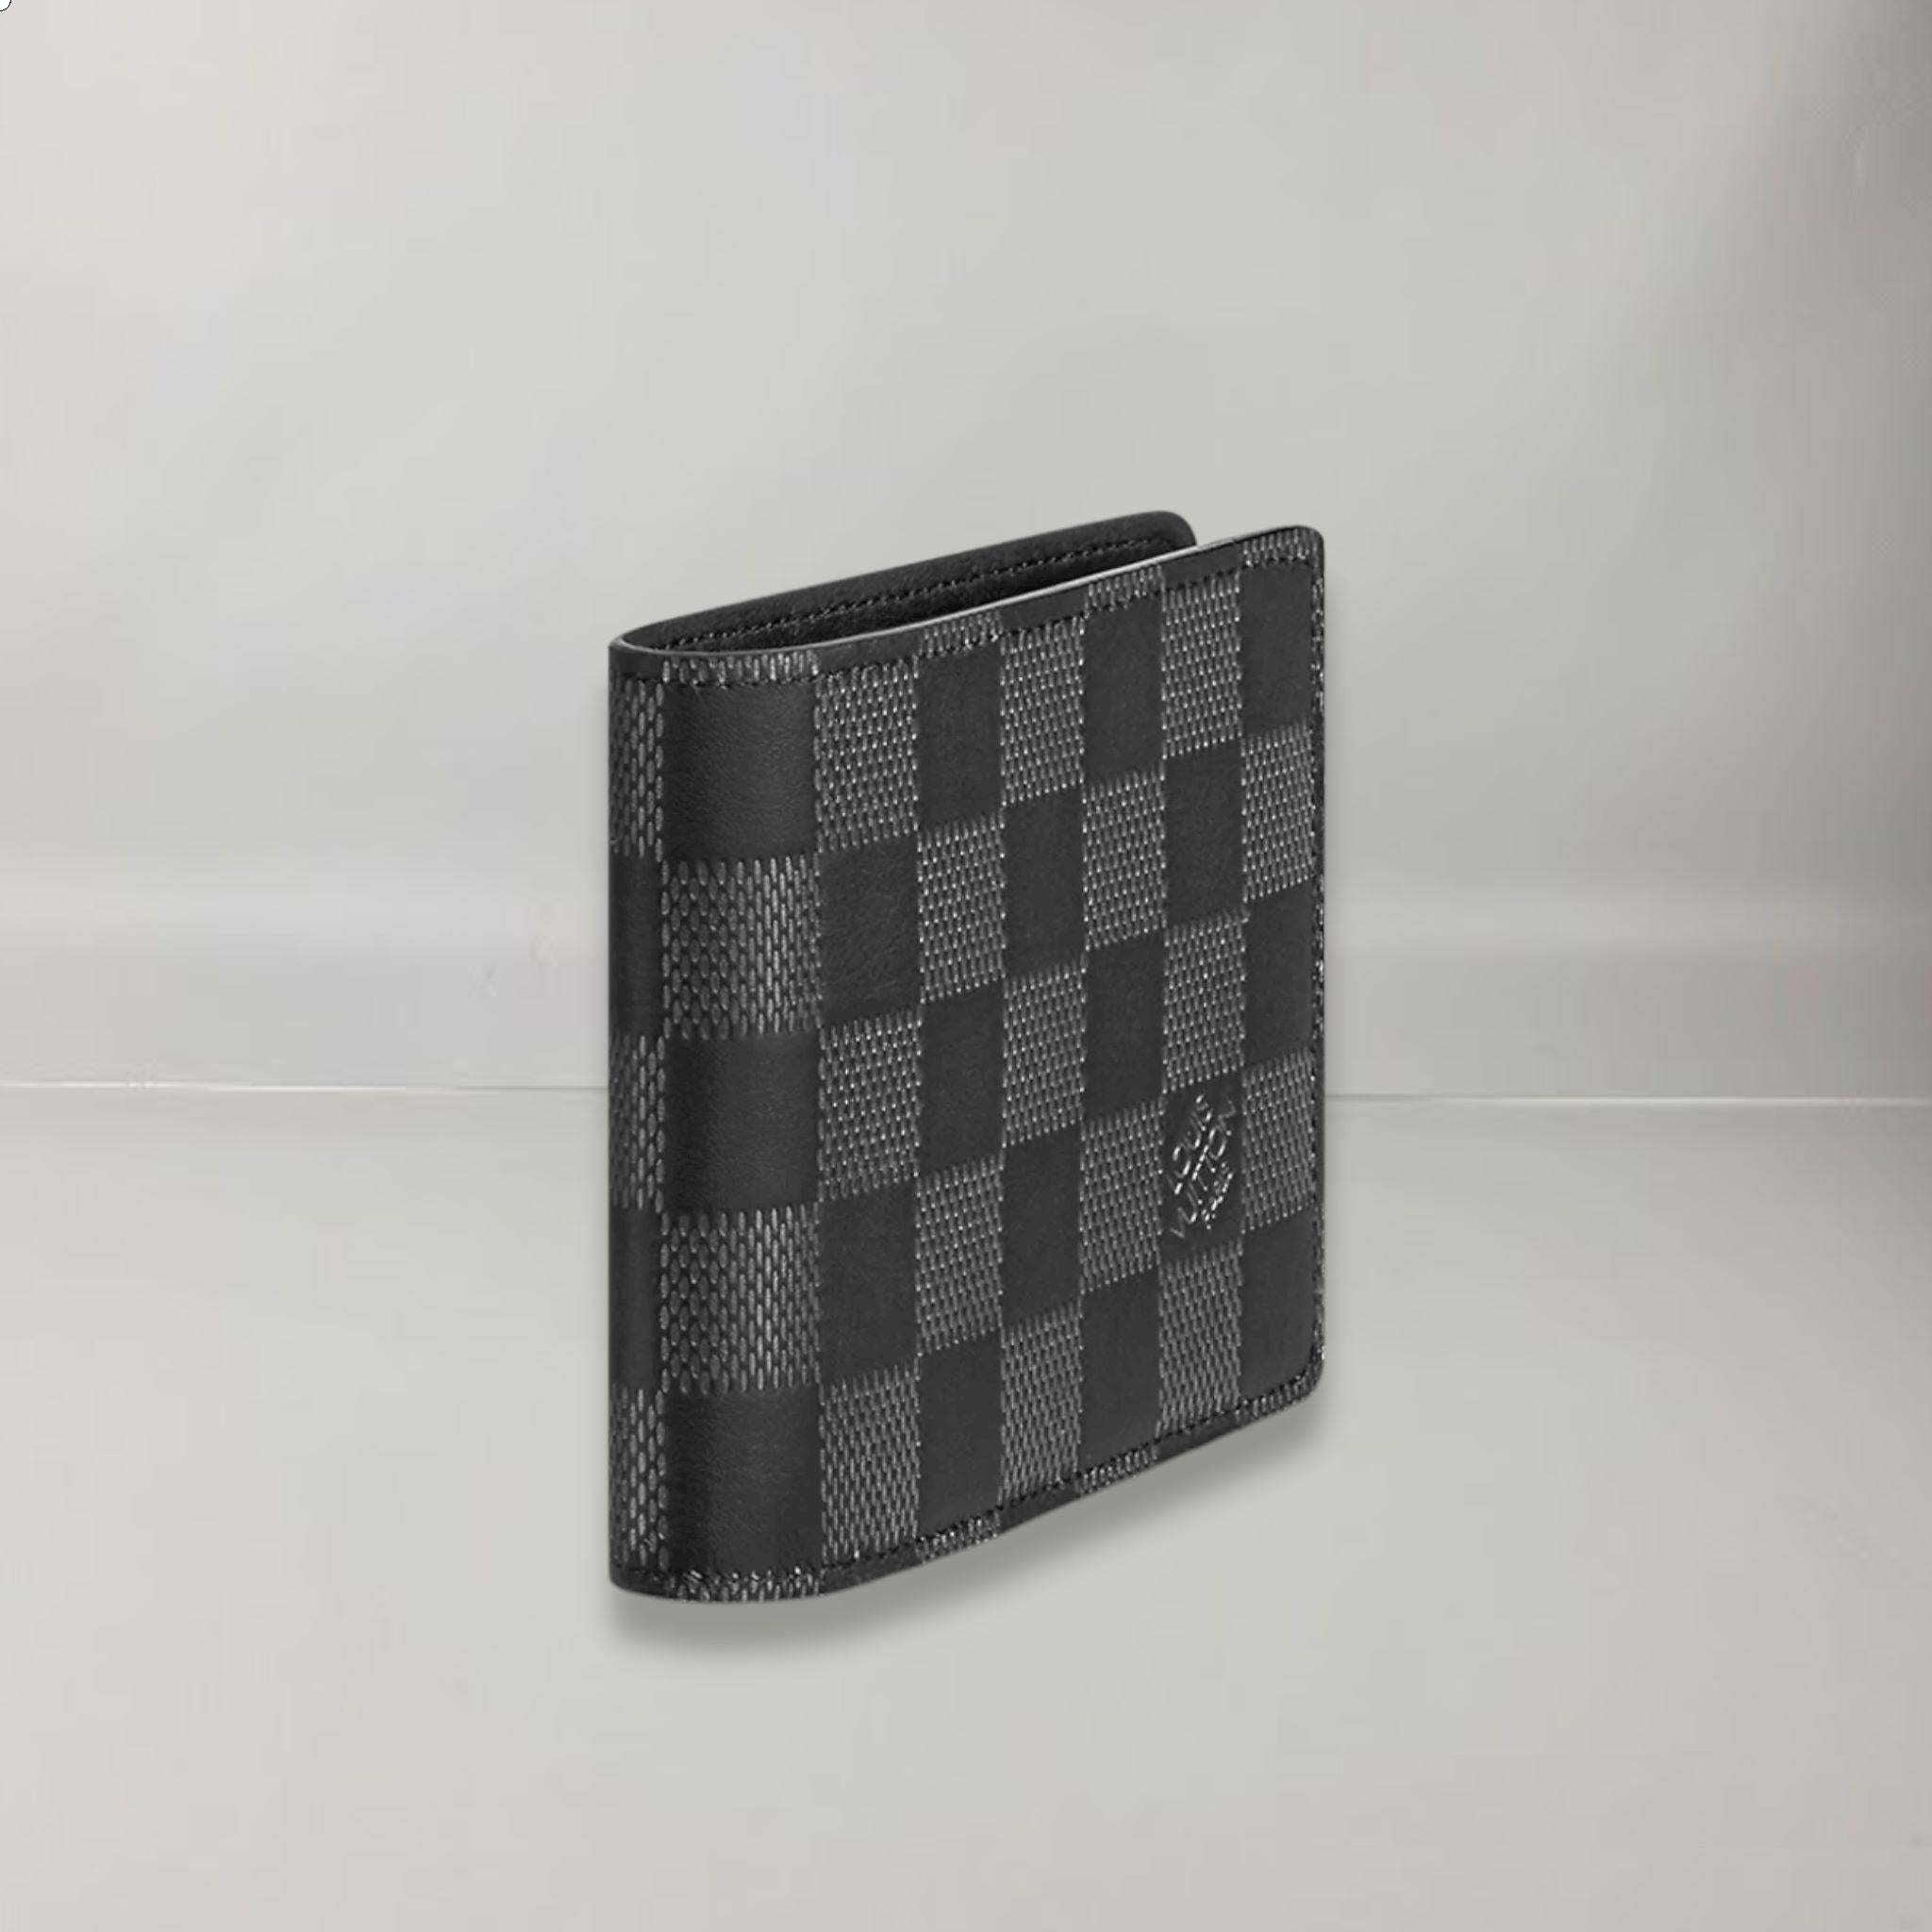 Damier Infini Onyx Silver cowhide leather
Cowhide trim
Textile lining
Silver metallic finishes
Three card slots
Two compartments for bills and receipts
Two side slots for receipts
Two slots for business cards